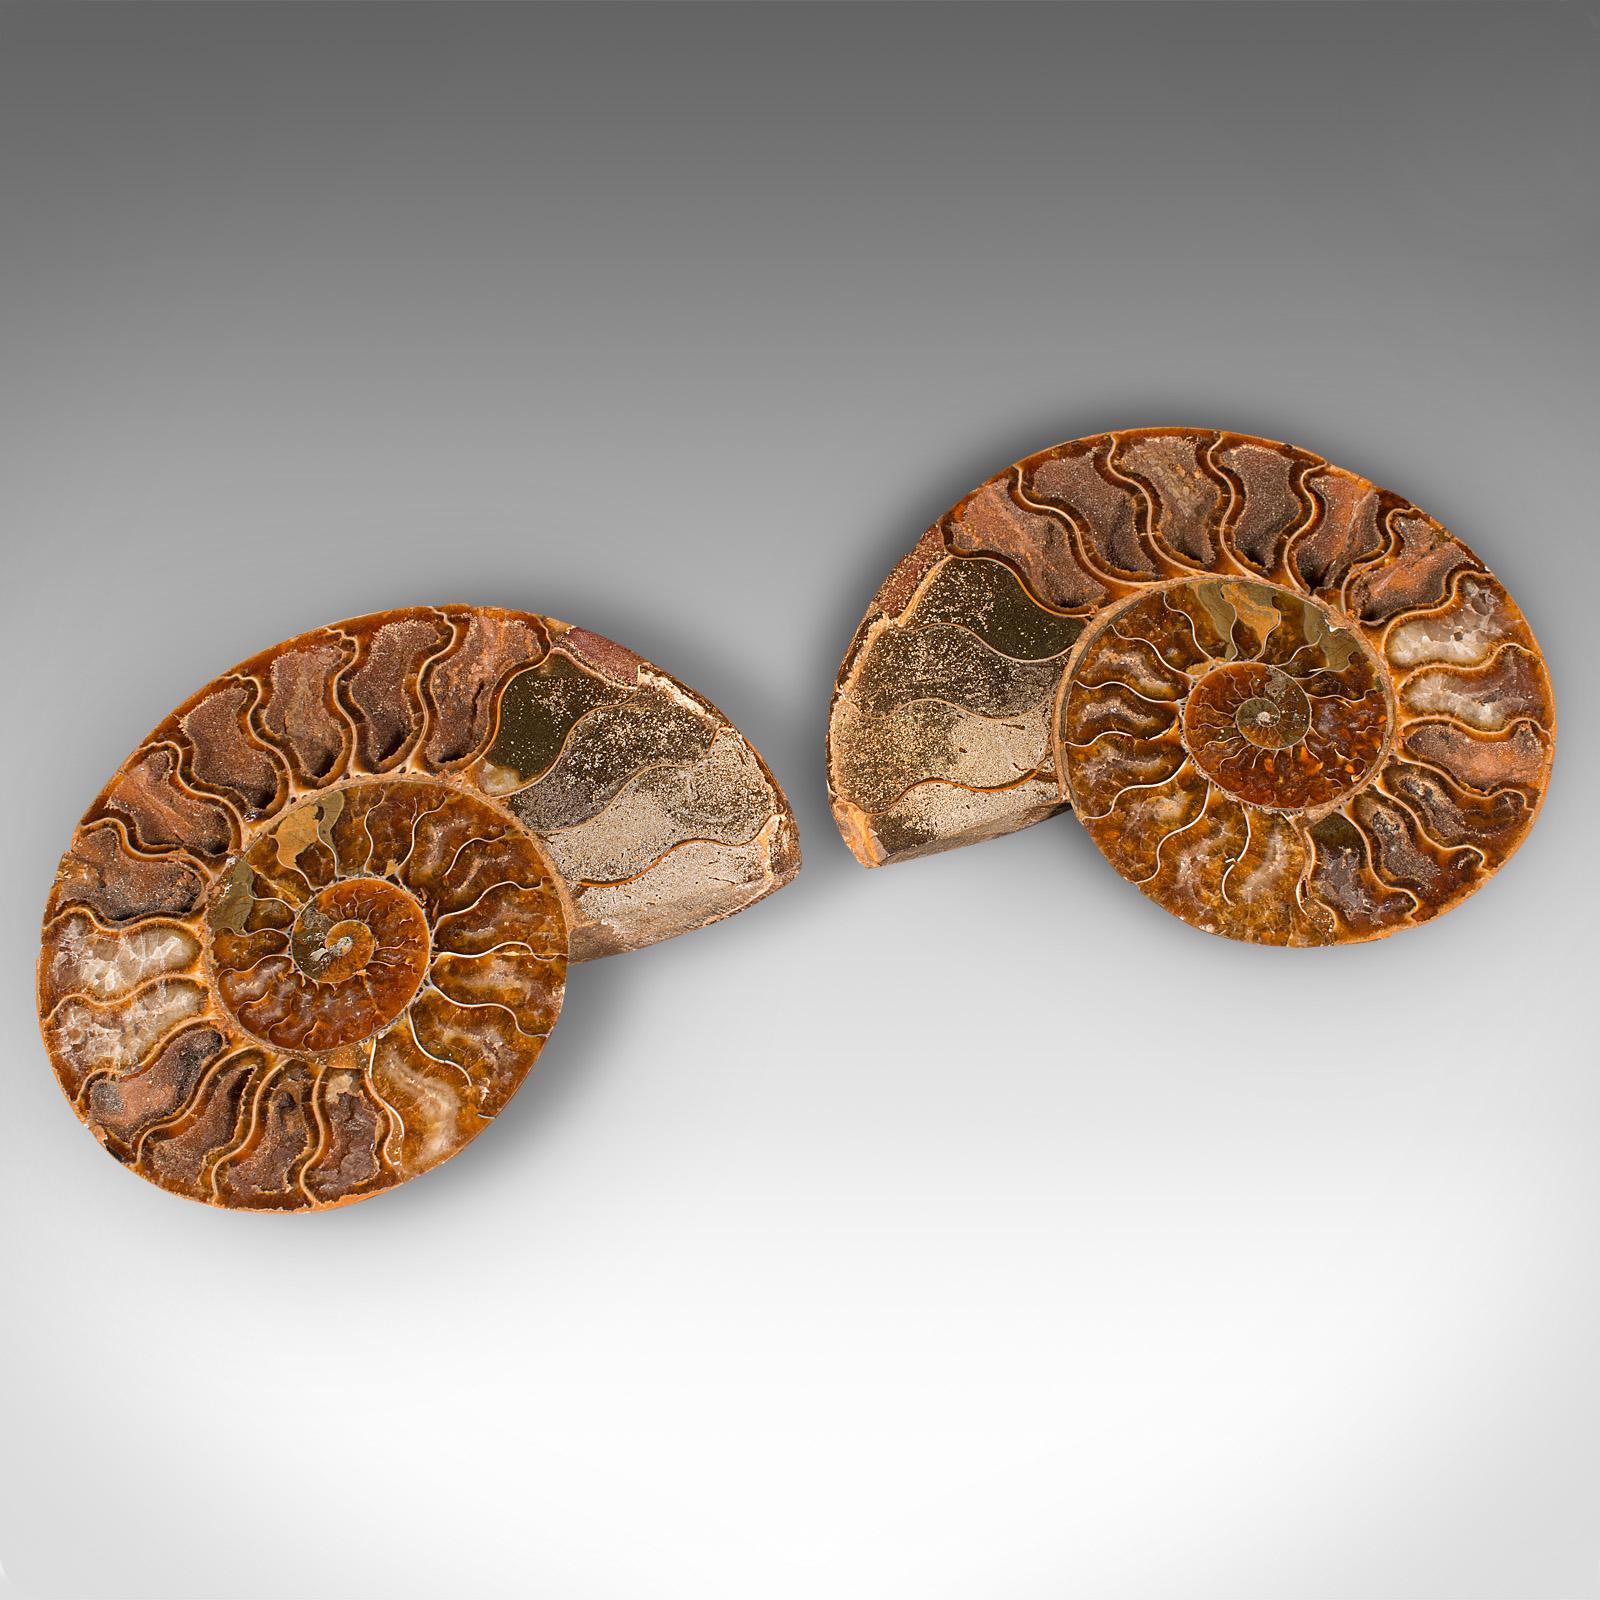 Vintage Decorative Halved Ammonite, African, Fossil, Display Plinth, Cretaceous For Sale 1